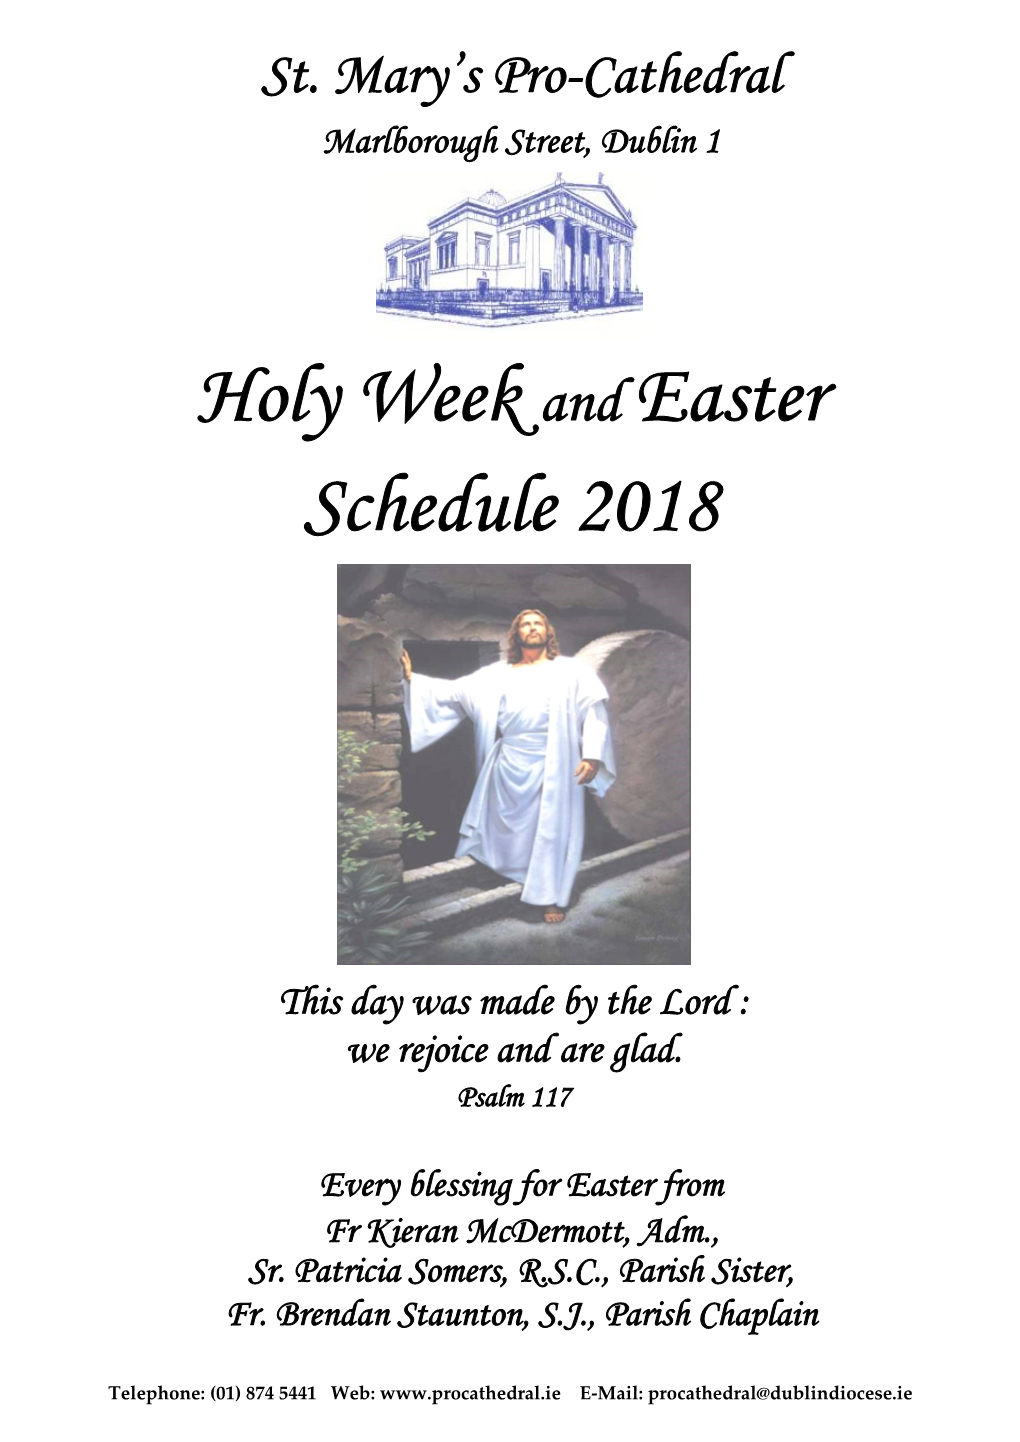 Holy Week and Easter Schedule 2018